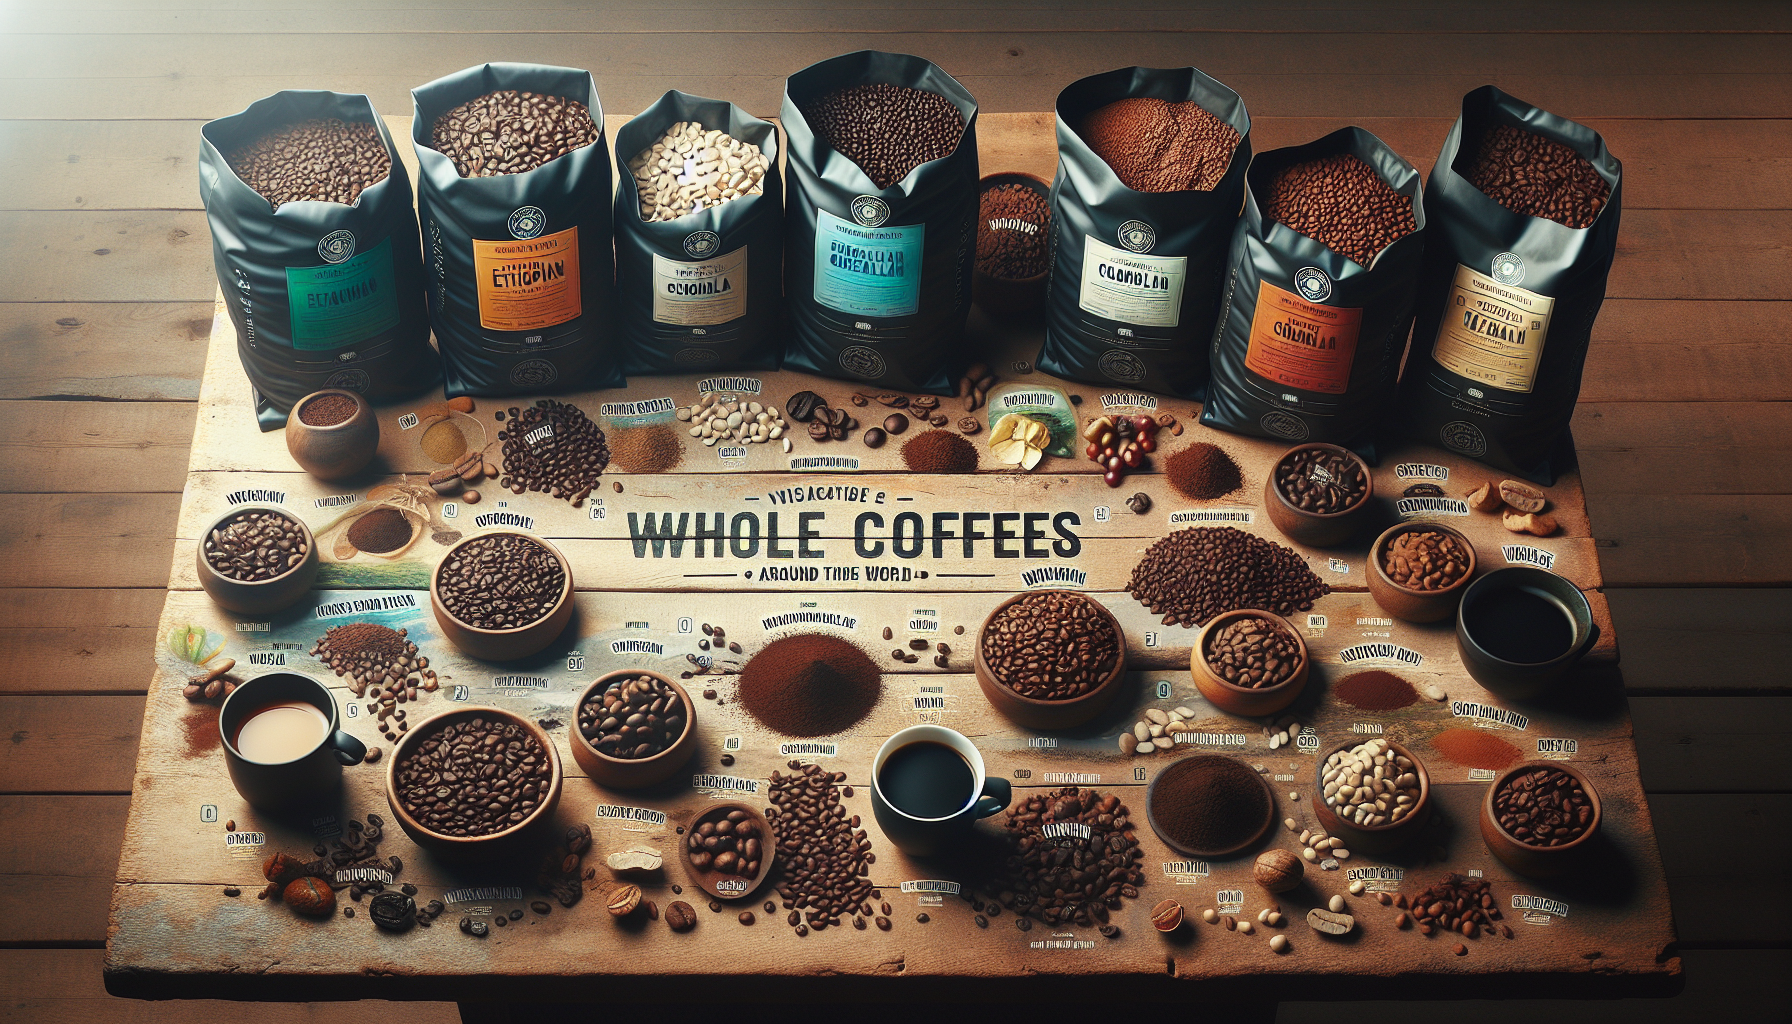 Visualize a collection of top whole bean coffees from around the world, ready to make the perfect cup of brew. Each bag of beans is distinctively labeled and presented in an aesthetically pleasing man